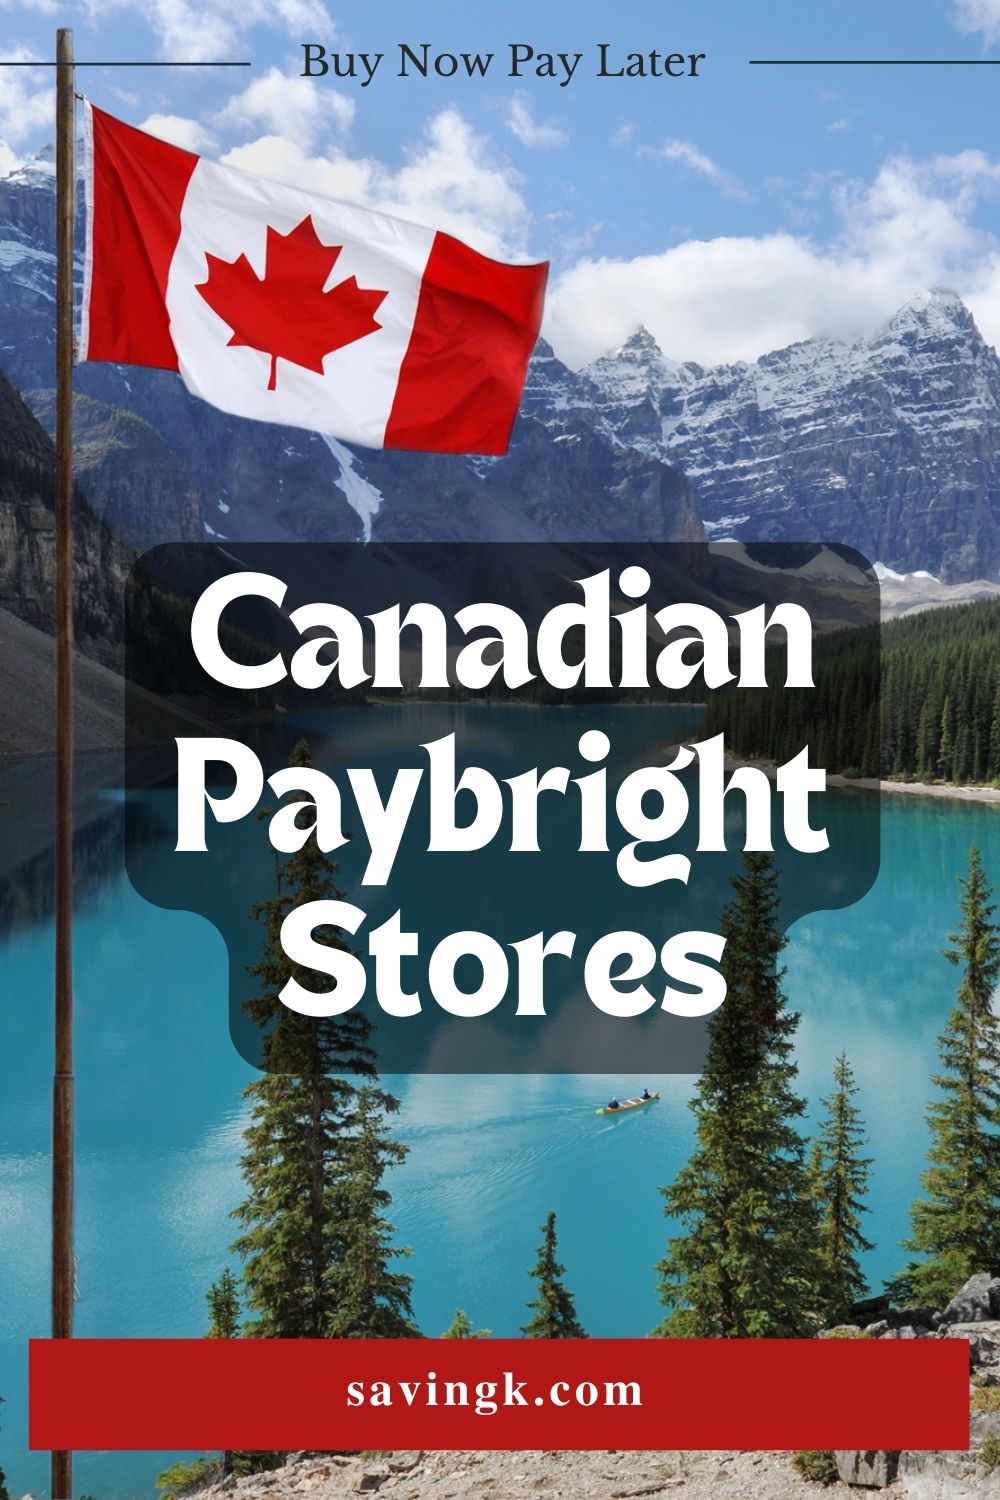 Canadian Paybright Stores